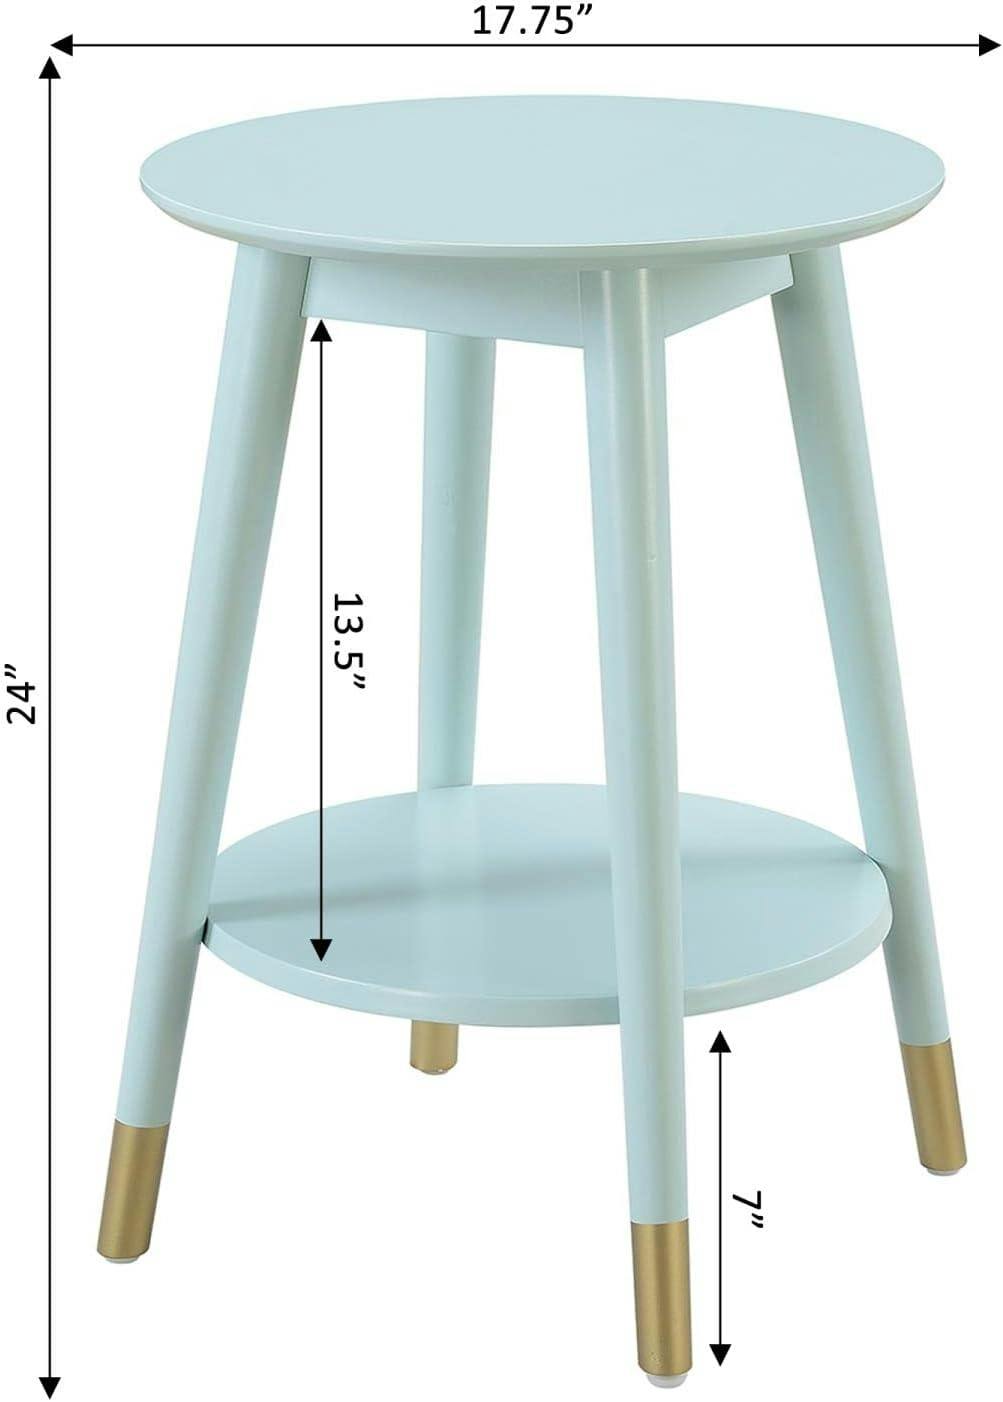 Savannah Sea Foam Round End Table with Gold-Tipped Legs